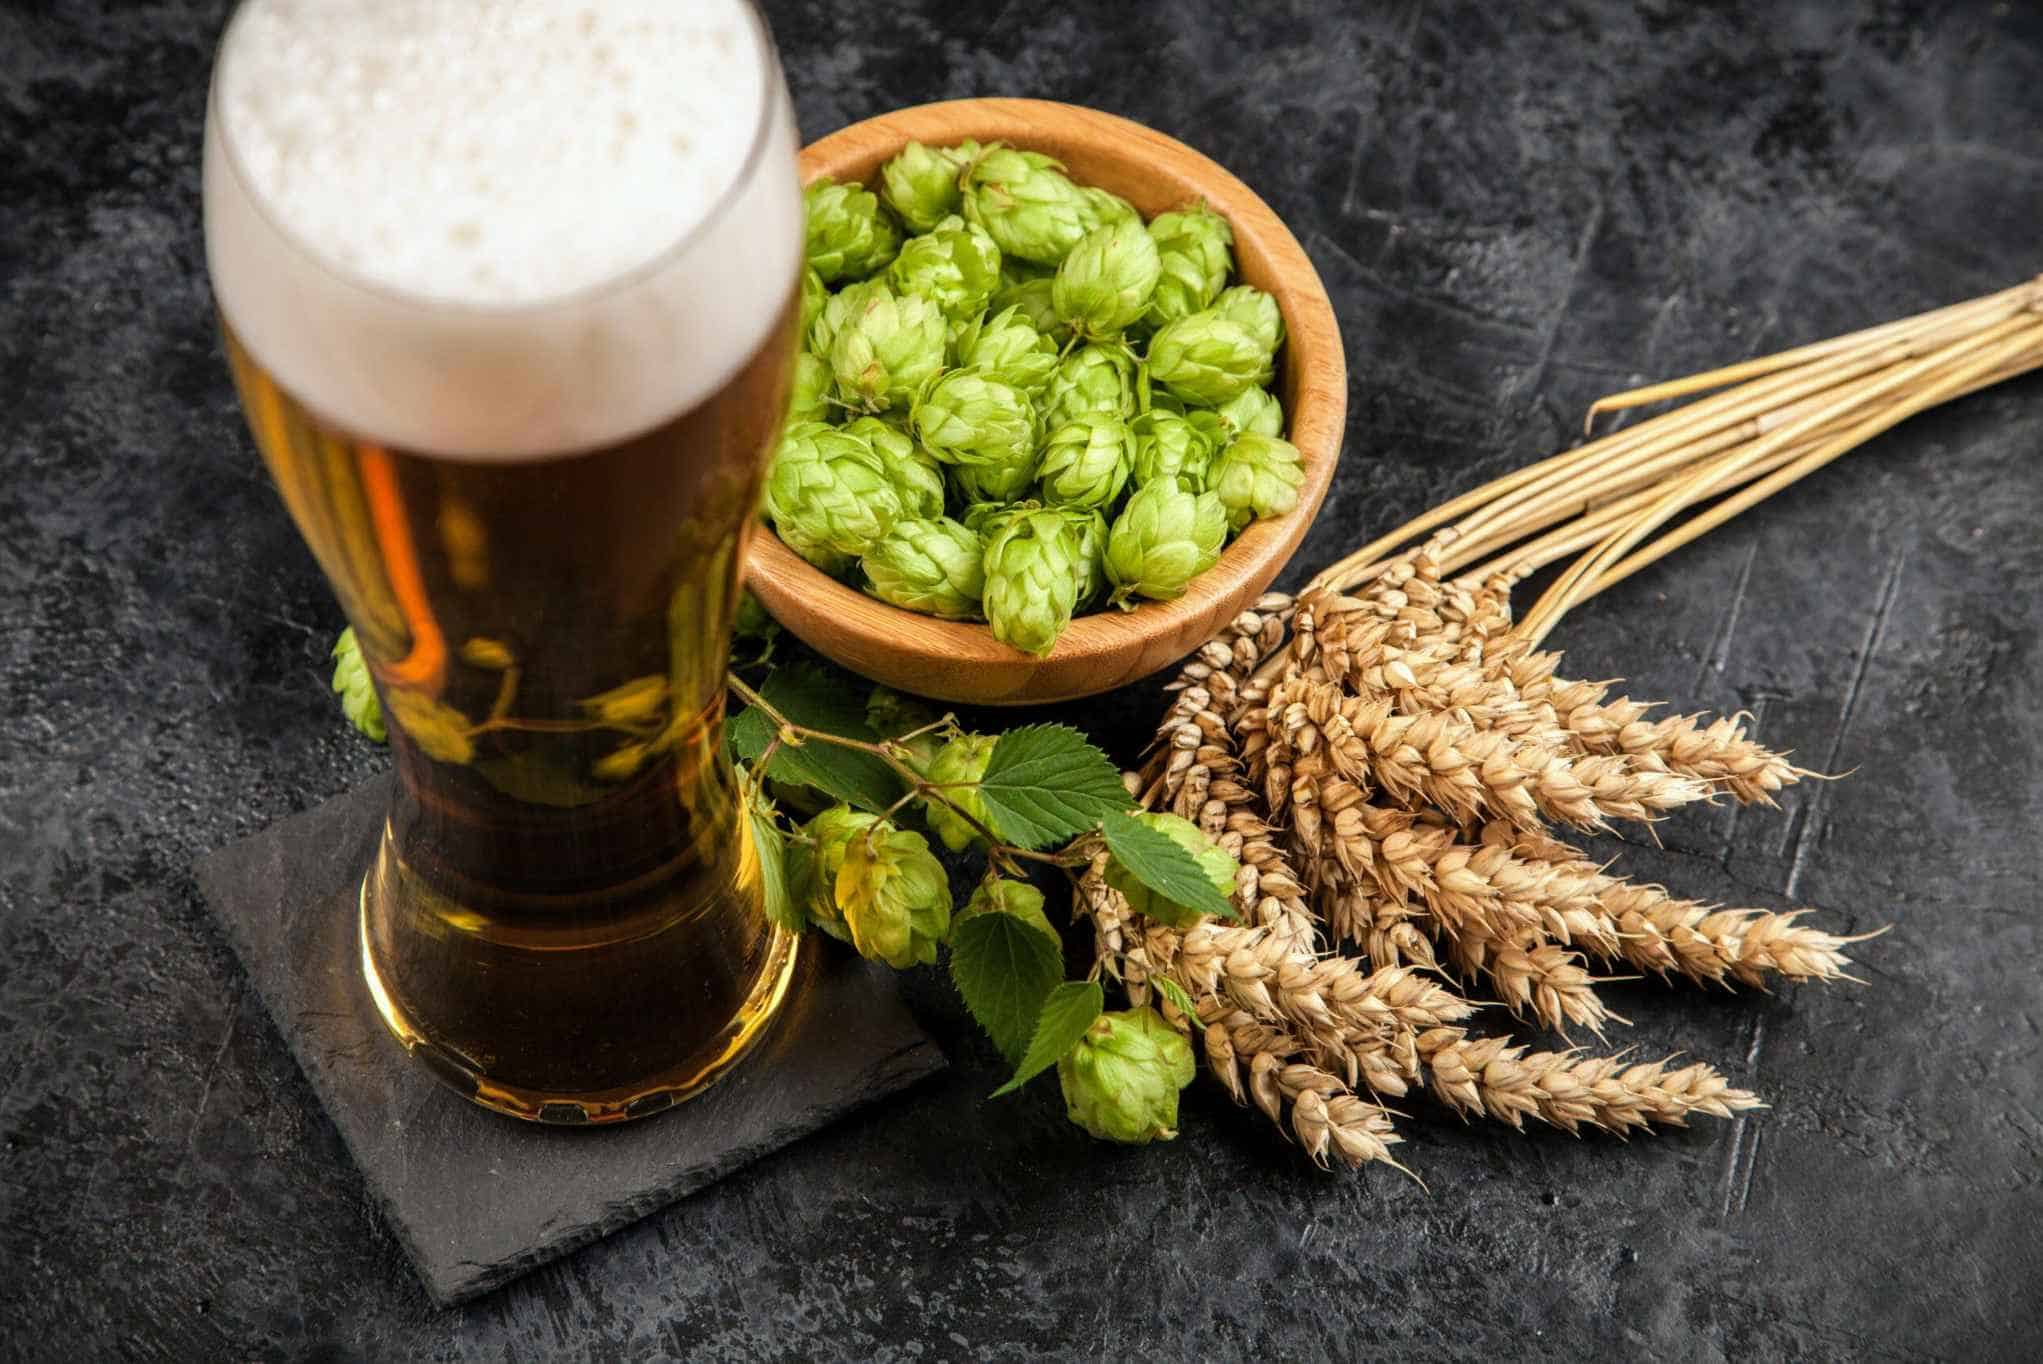 Why are Hops in Beer